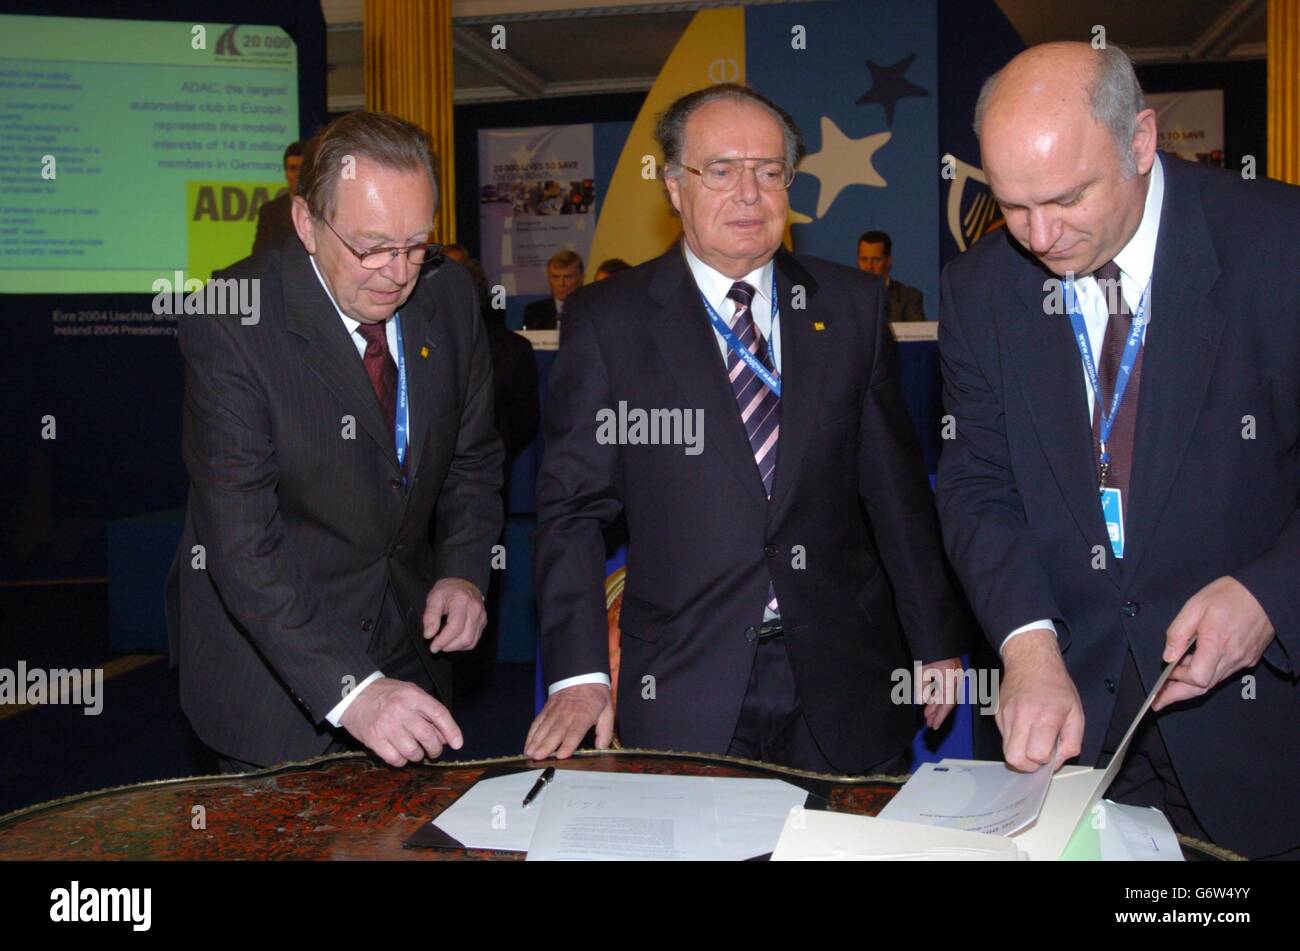 Dr Erhard Oehm (L) from ADAC with colleague, Mr Boem, signing an historic European Charter on Road Safety, at Dublin Castle, Ireland. The Charter is a key element of the European Road Saftey Action Programme that has as its goal reducing the number of road deaths in Europe by at least 50% by 2010. According to the Irish Department of Transport, 40,000 people die as a result of traffic accidents in the 15 EU countries, with 1.2 million worldwide killed each year on the roads, or over 3,000 every day. Stock Photo